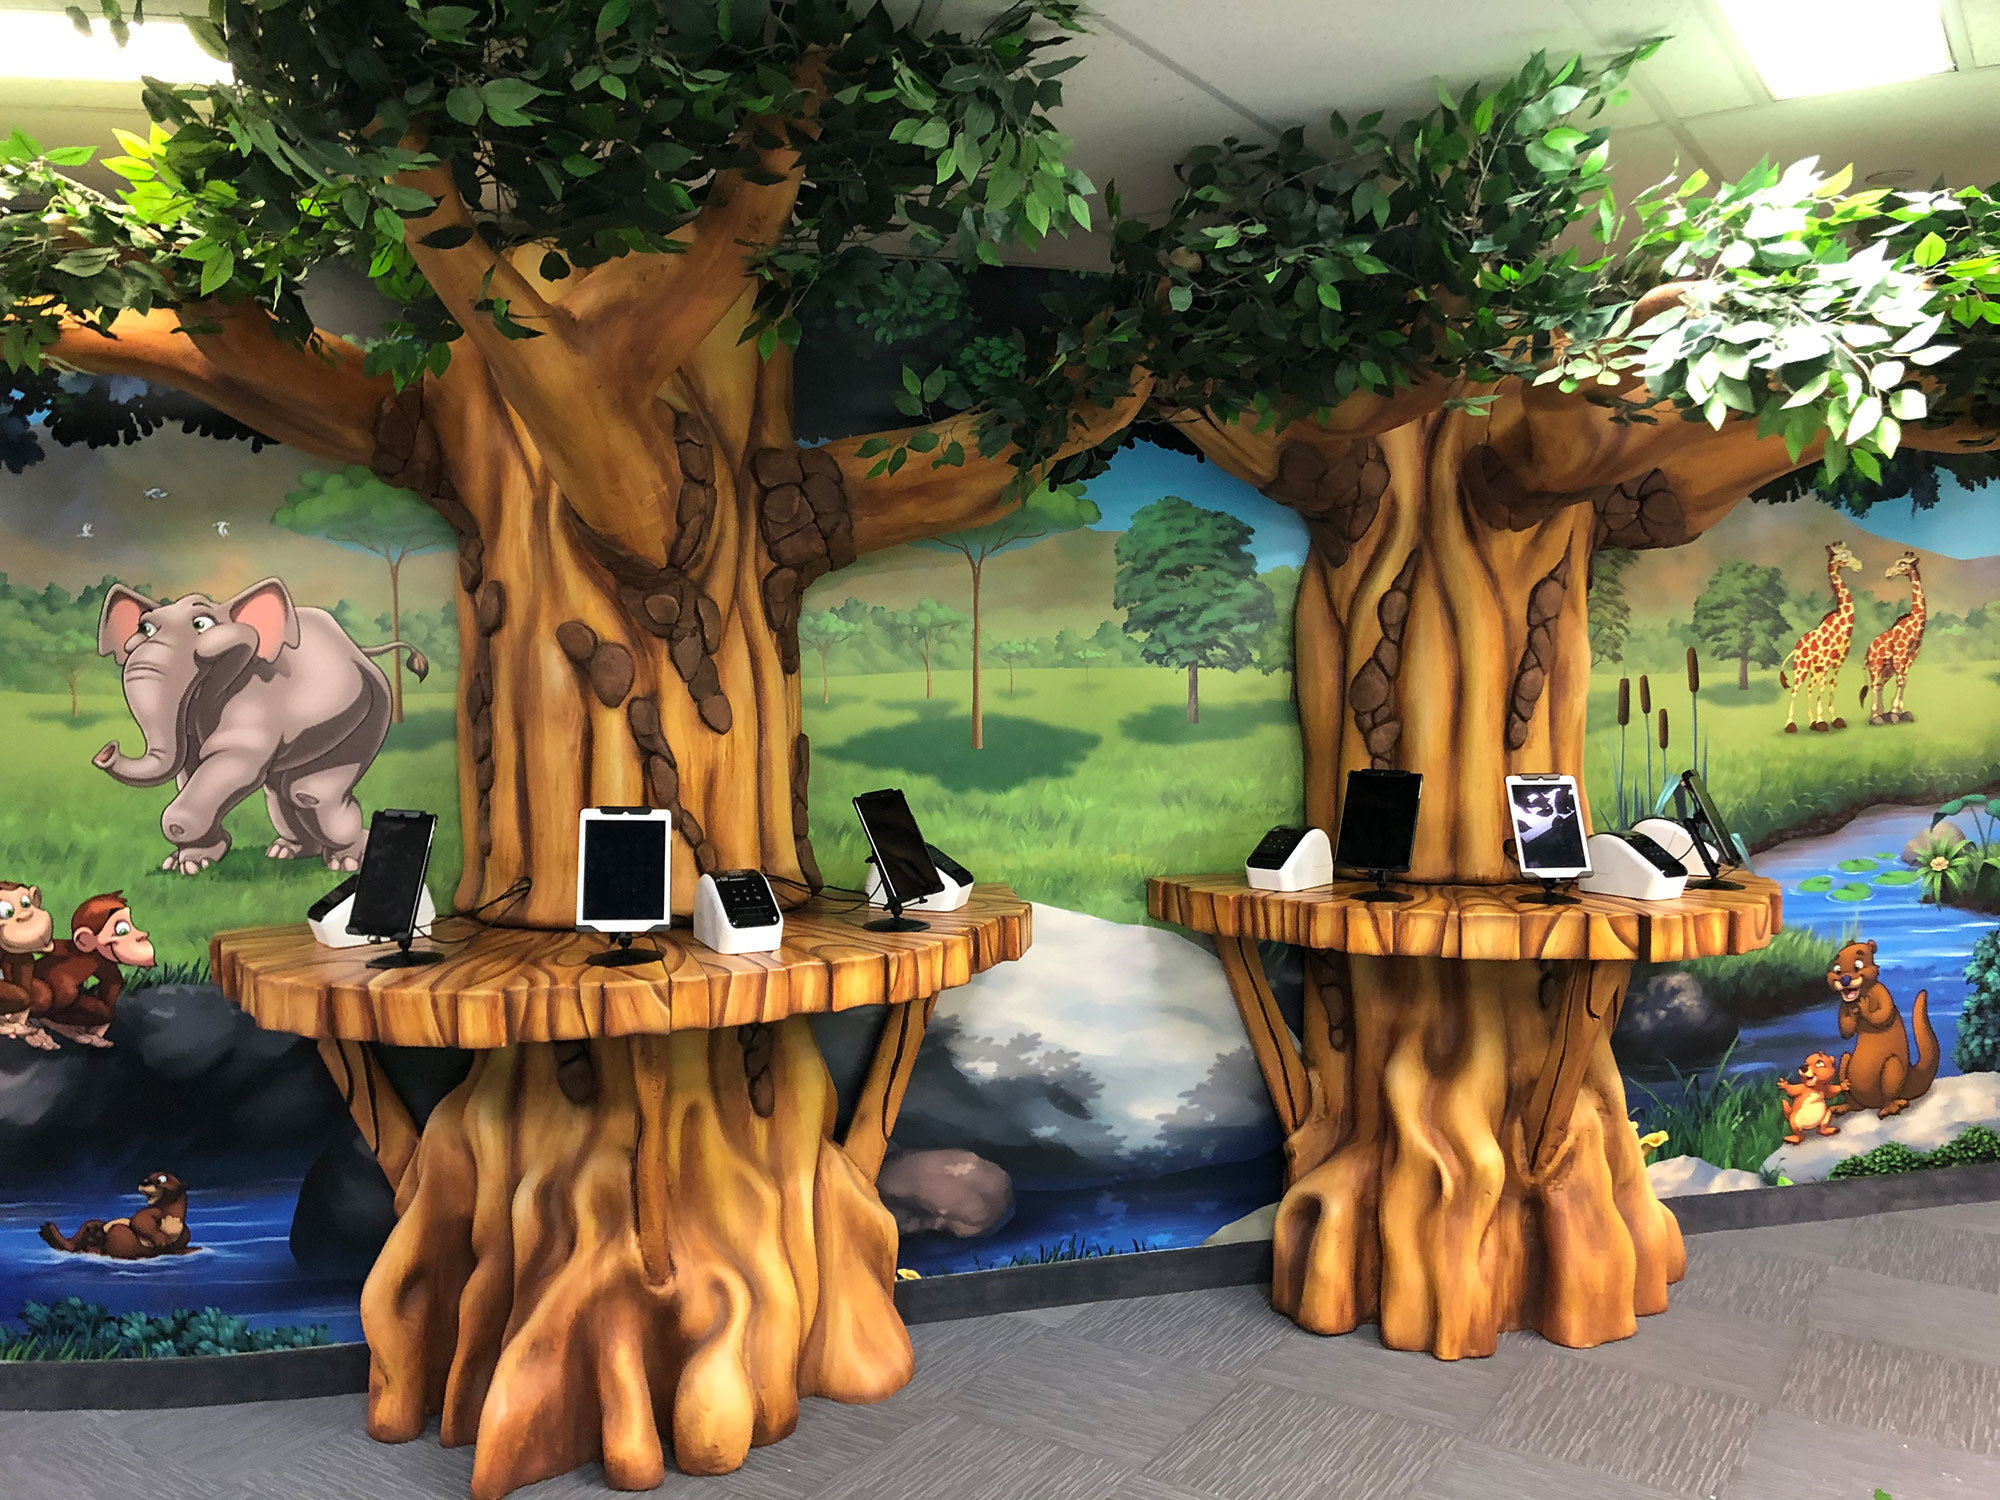 3D Sculpted Tree Check In Kiosk Stations with wall murals depicting an African plain with Giraffes, elephants and monkeys.